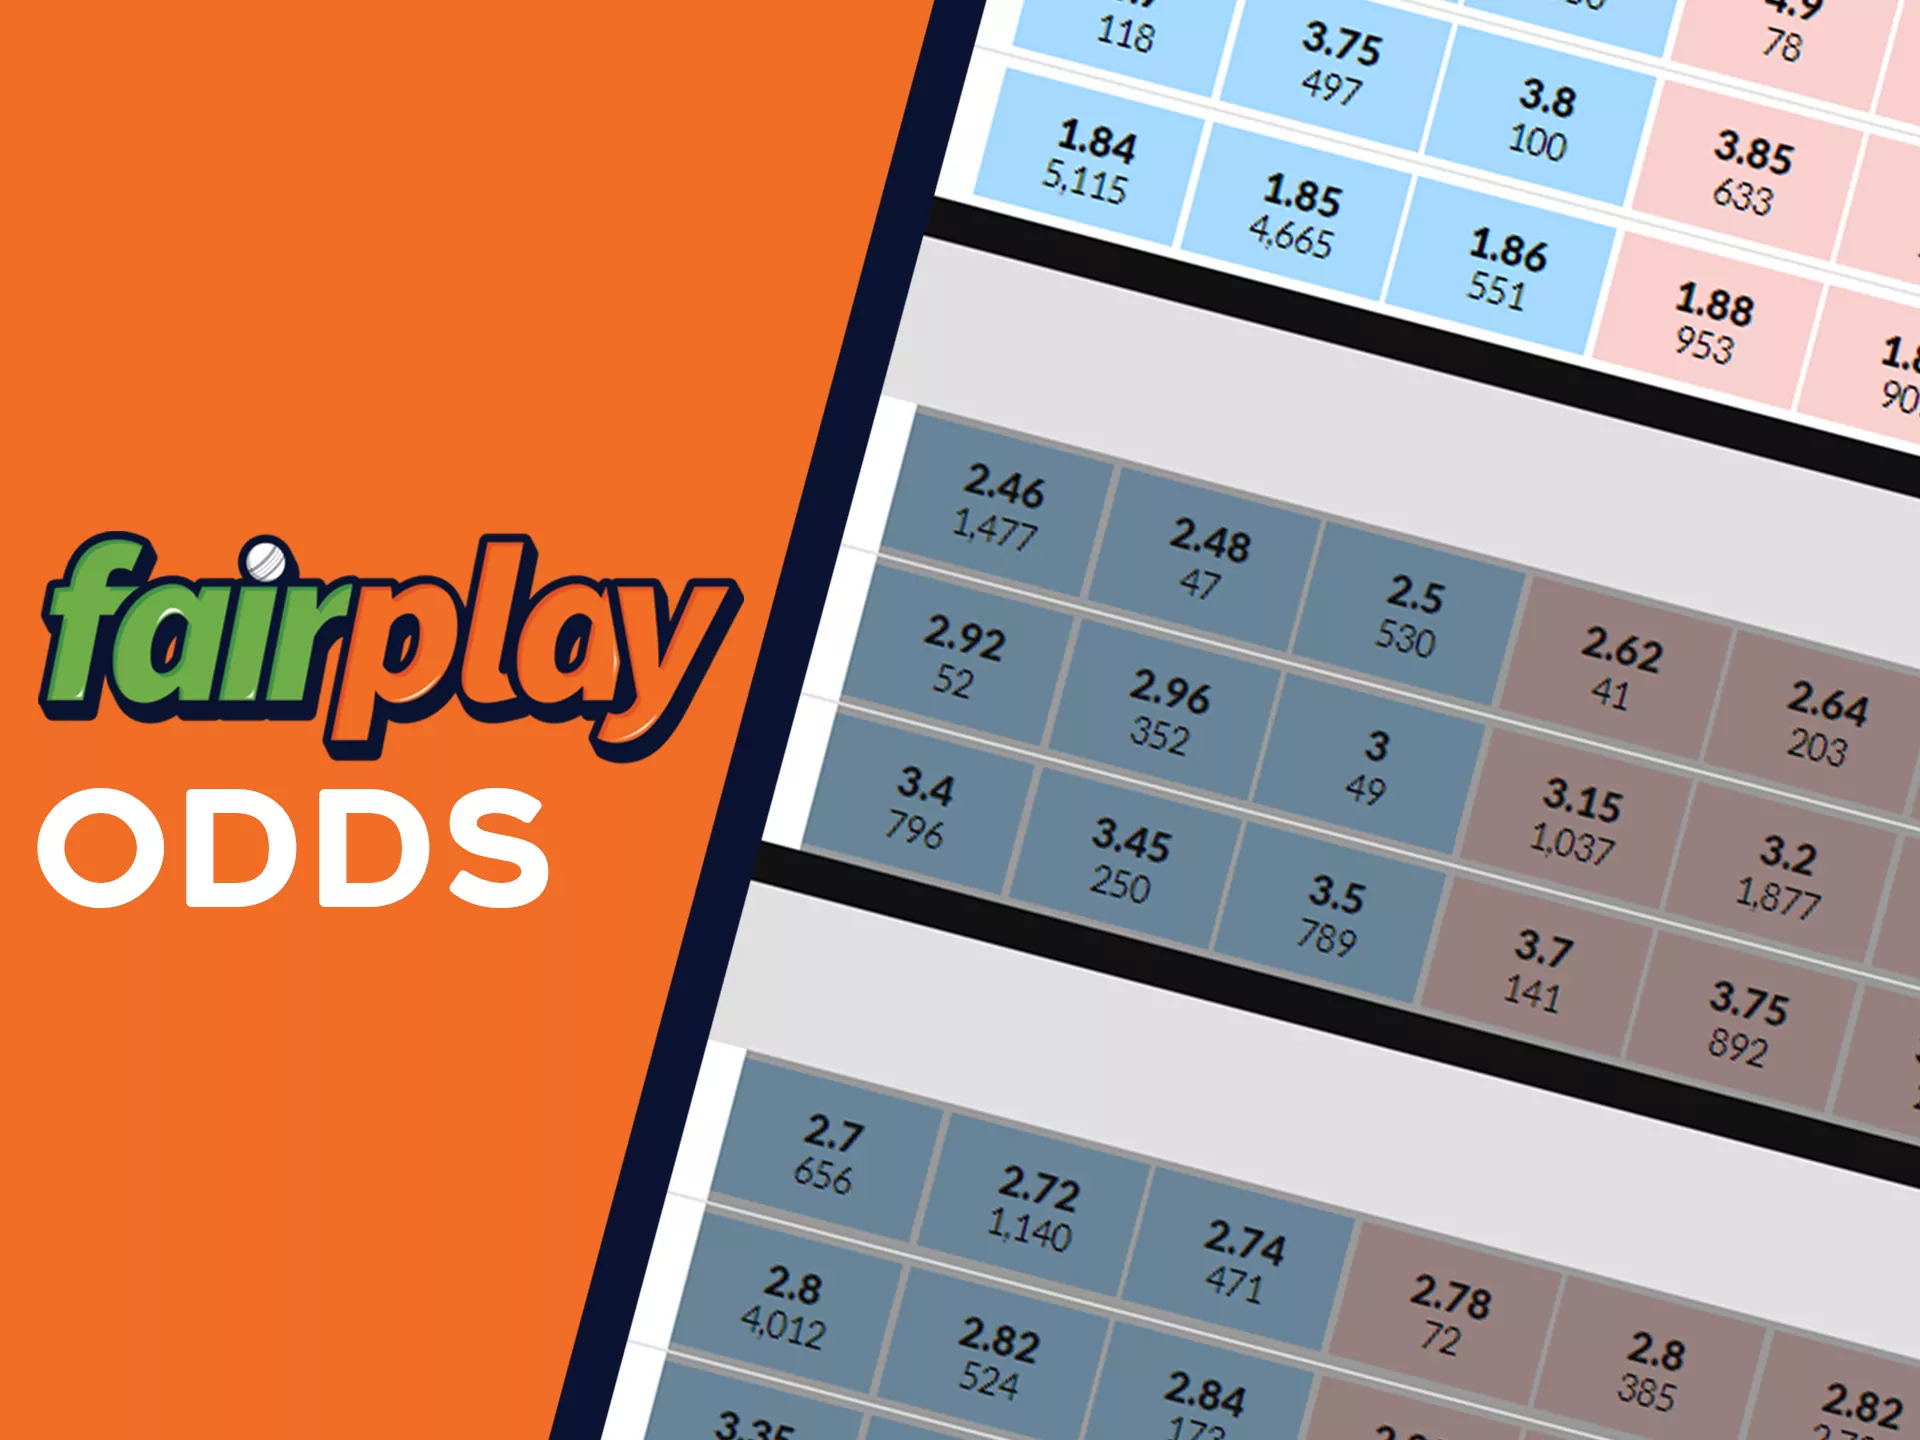 Fairplay offers one of the most profitable odds.